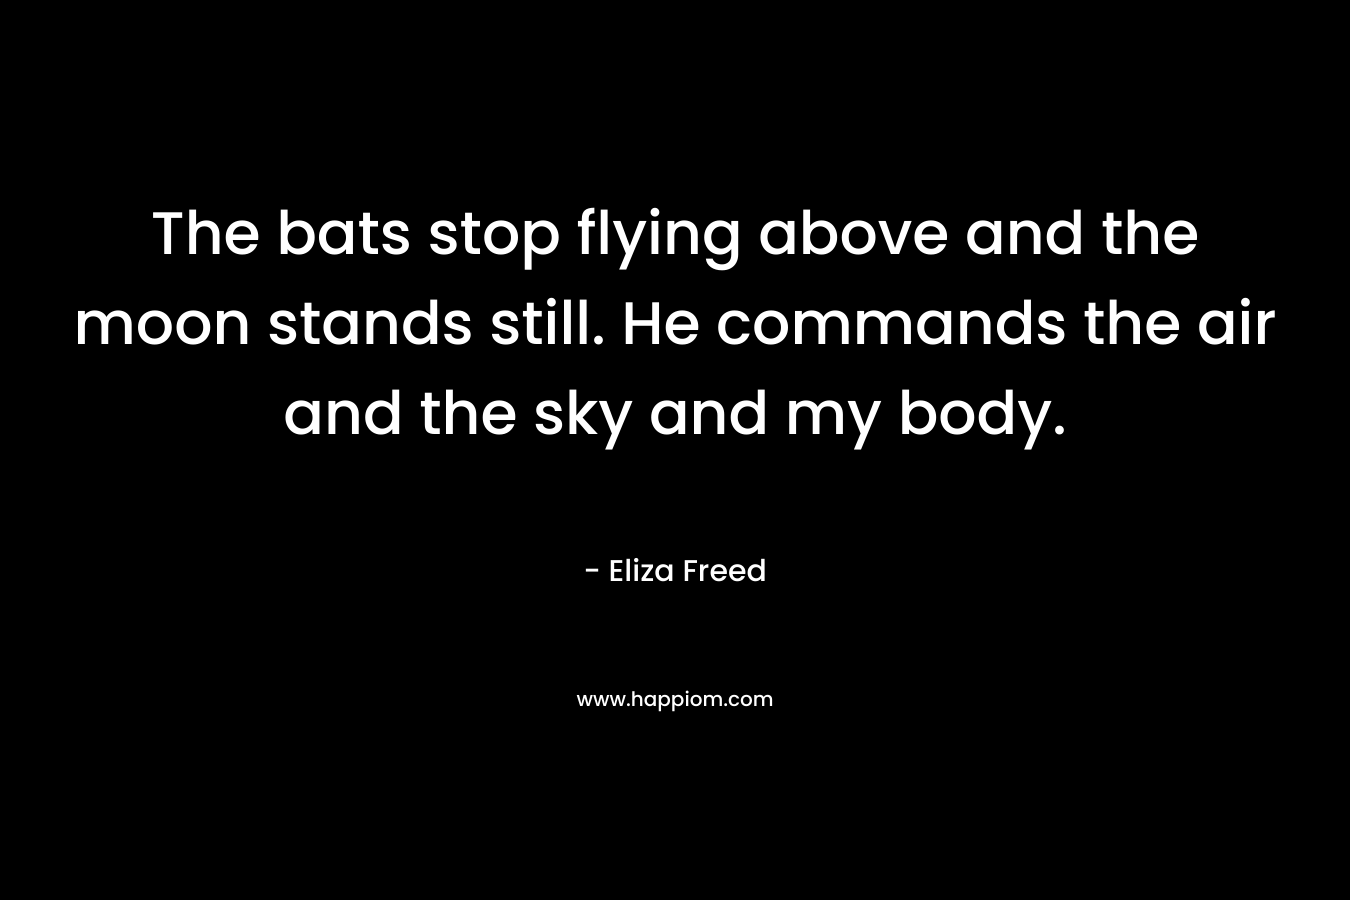 The bats stop flying above and the moon stands still. He commands the air and the sky and my body. – Eliza Freed